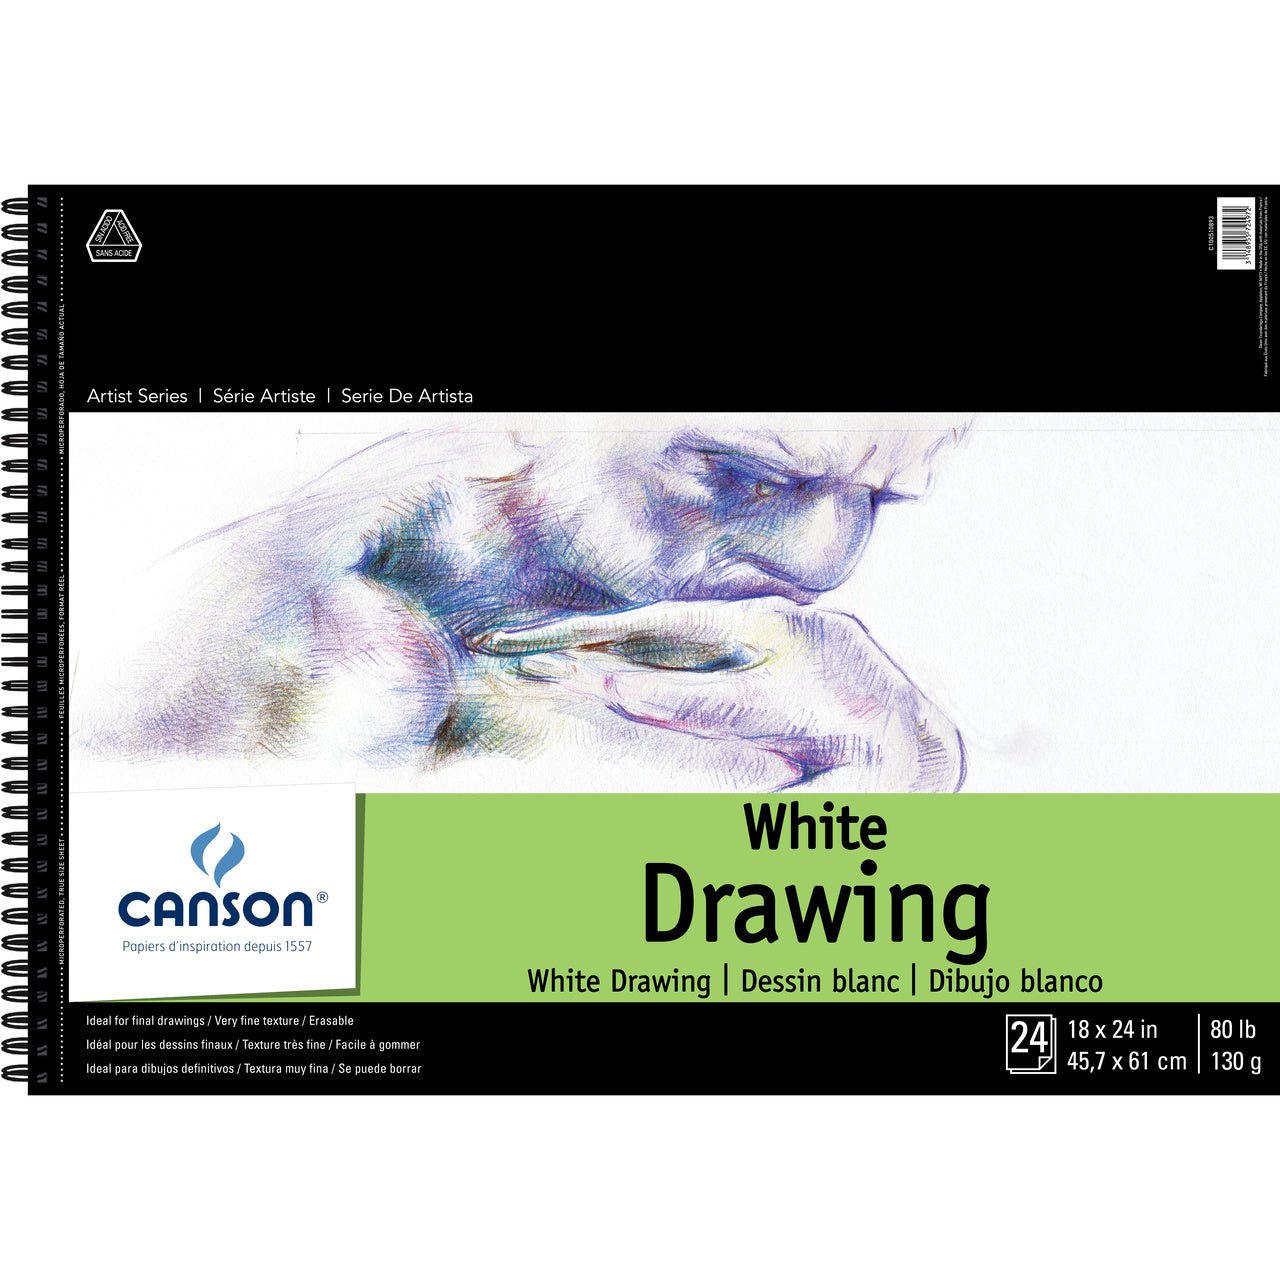 Canson Pure White 80 lb Drawing Pad 18x24 inch - merriartist.com